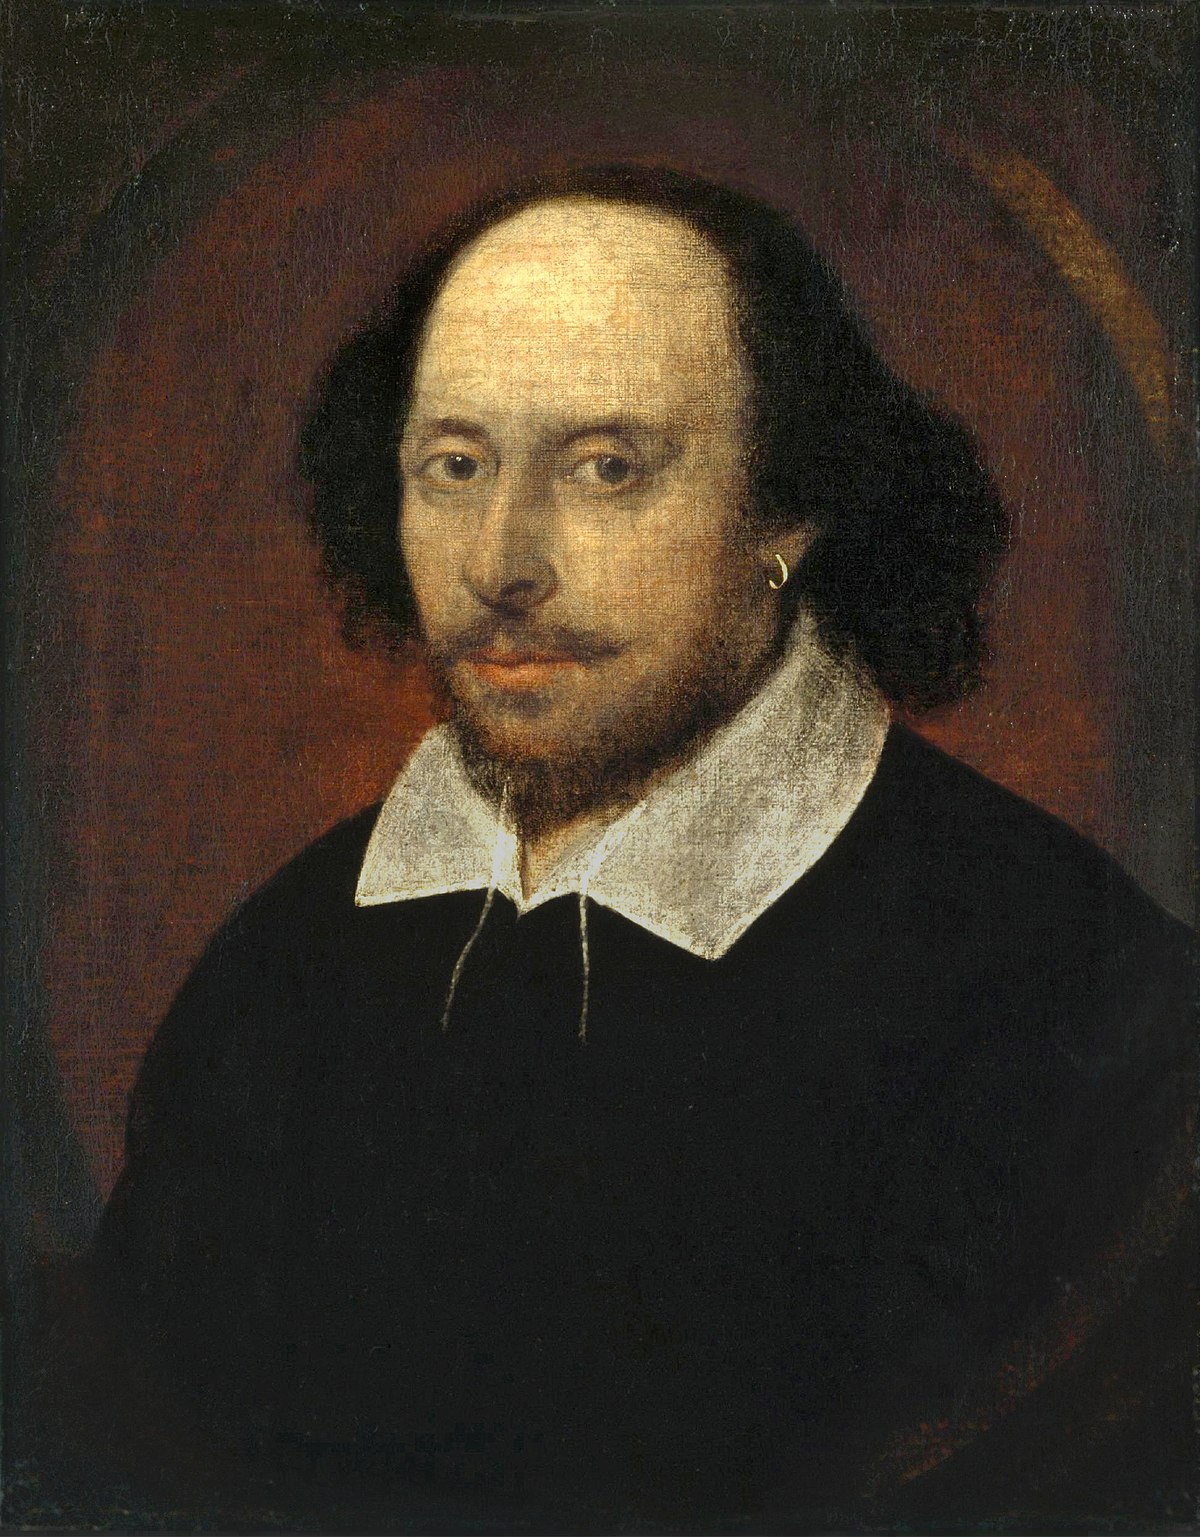 Complete works of Shakespeare